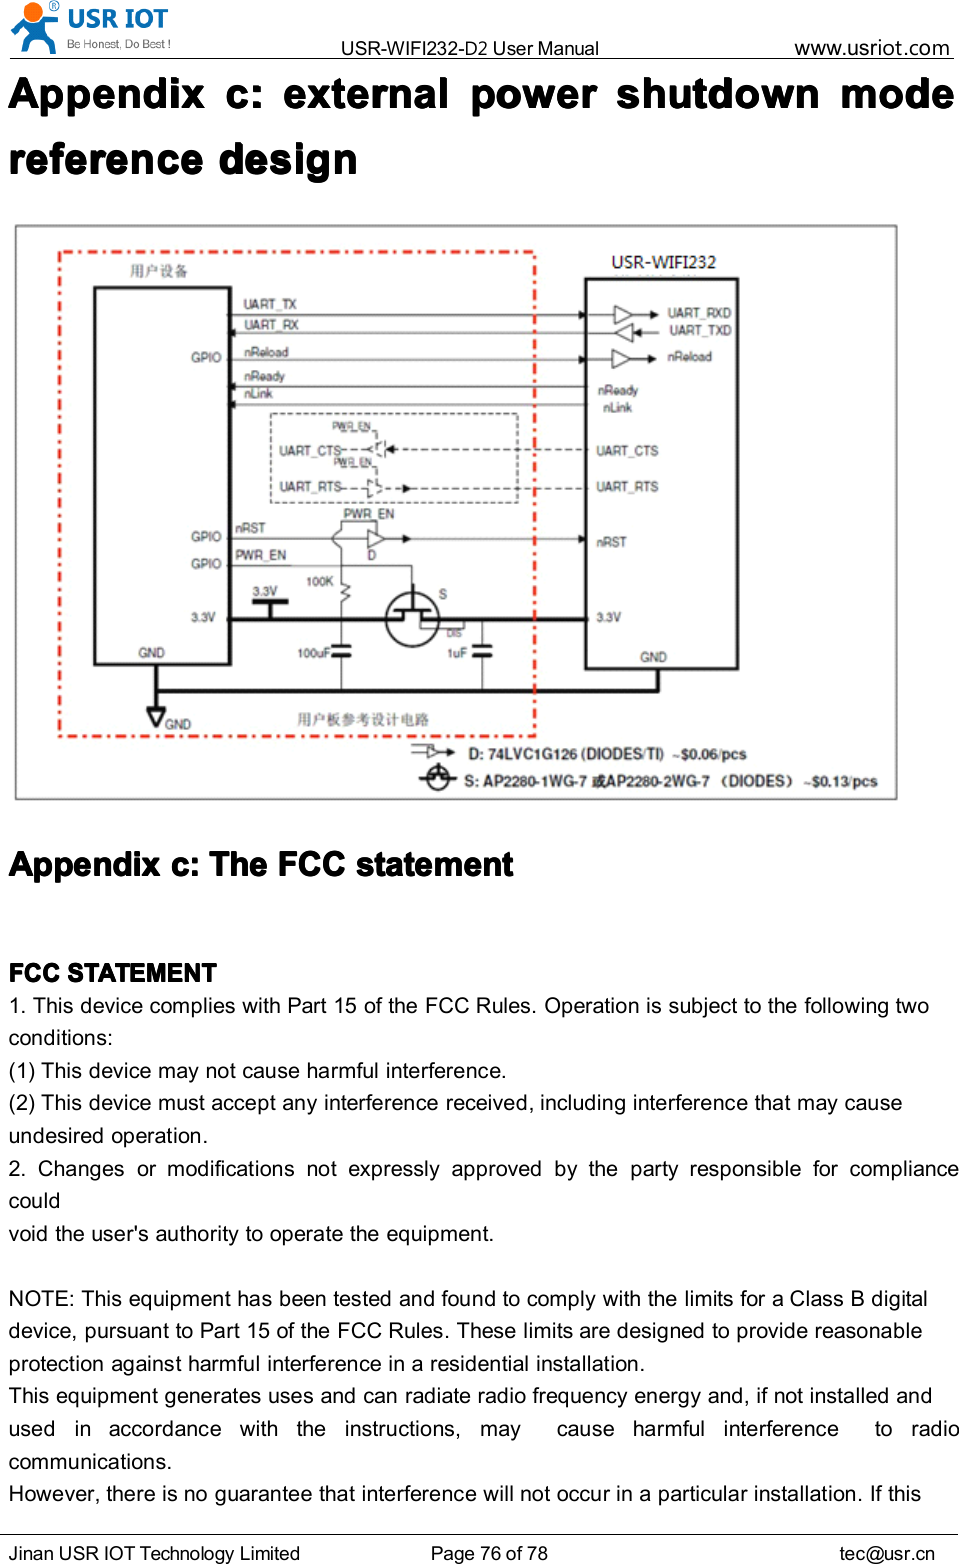 USR-WIFI232- D2 User Manual www.usr iot .comJinan USR IOT Technology Limited Page 76 of 78 tec@usr.cnAppendixAppendixAppendixAppendix cccc :::: externalexternalexternalexternal powerpowerpowerpower shutdownshutdownshutdownshutdown modemodemodemodereferencereferencereferencereference designdesigndesigndesignAppendixAppendixAppendixAppendix c:c:c:c: TheTheTheThe FCCFCCFCCFCC statementstatementstatementstatementFCCFCCFCCFCC STATEMENTSTATEMENTSTATEMENTSTATEMENT1. This device complies with Part 15 of the FCC Rules. Operation is subject to the following twoconditions:(1) This device may not cause harmful interference.(2) This device must accept any interference received, including interference that may causeundesired operation.2. Changes or modifications not expressly approved by the party responsible for compliancecouldvoid the user&apos;s authority to operate the equipment.NOTE: This equipment has been tested and found to comply with the limits for a Class B digitaldevice, pursuant to Part 15 of the FCC Rules. These limits are designed to provide reasonableprotection against harmful interference in a residential installation.This equipment generates uses and can radiate radio frequency energy and, if not installed andused in accordance with the instructions, may cause harmful interference to radiocommunications.However, there is no guarantee that interference will not occur in a particular installation. If this